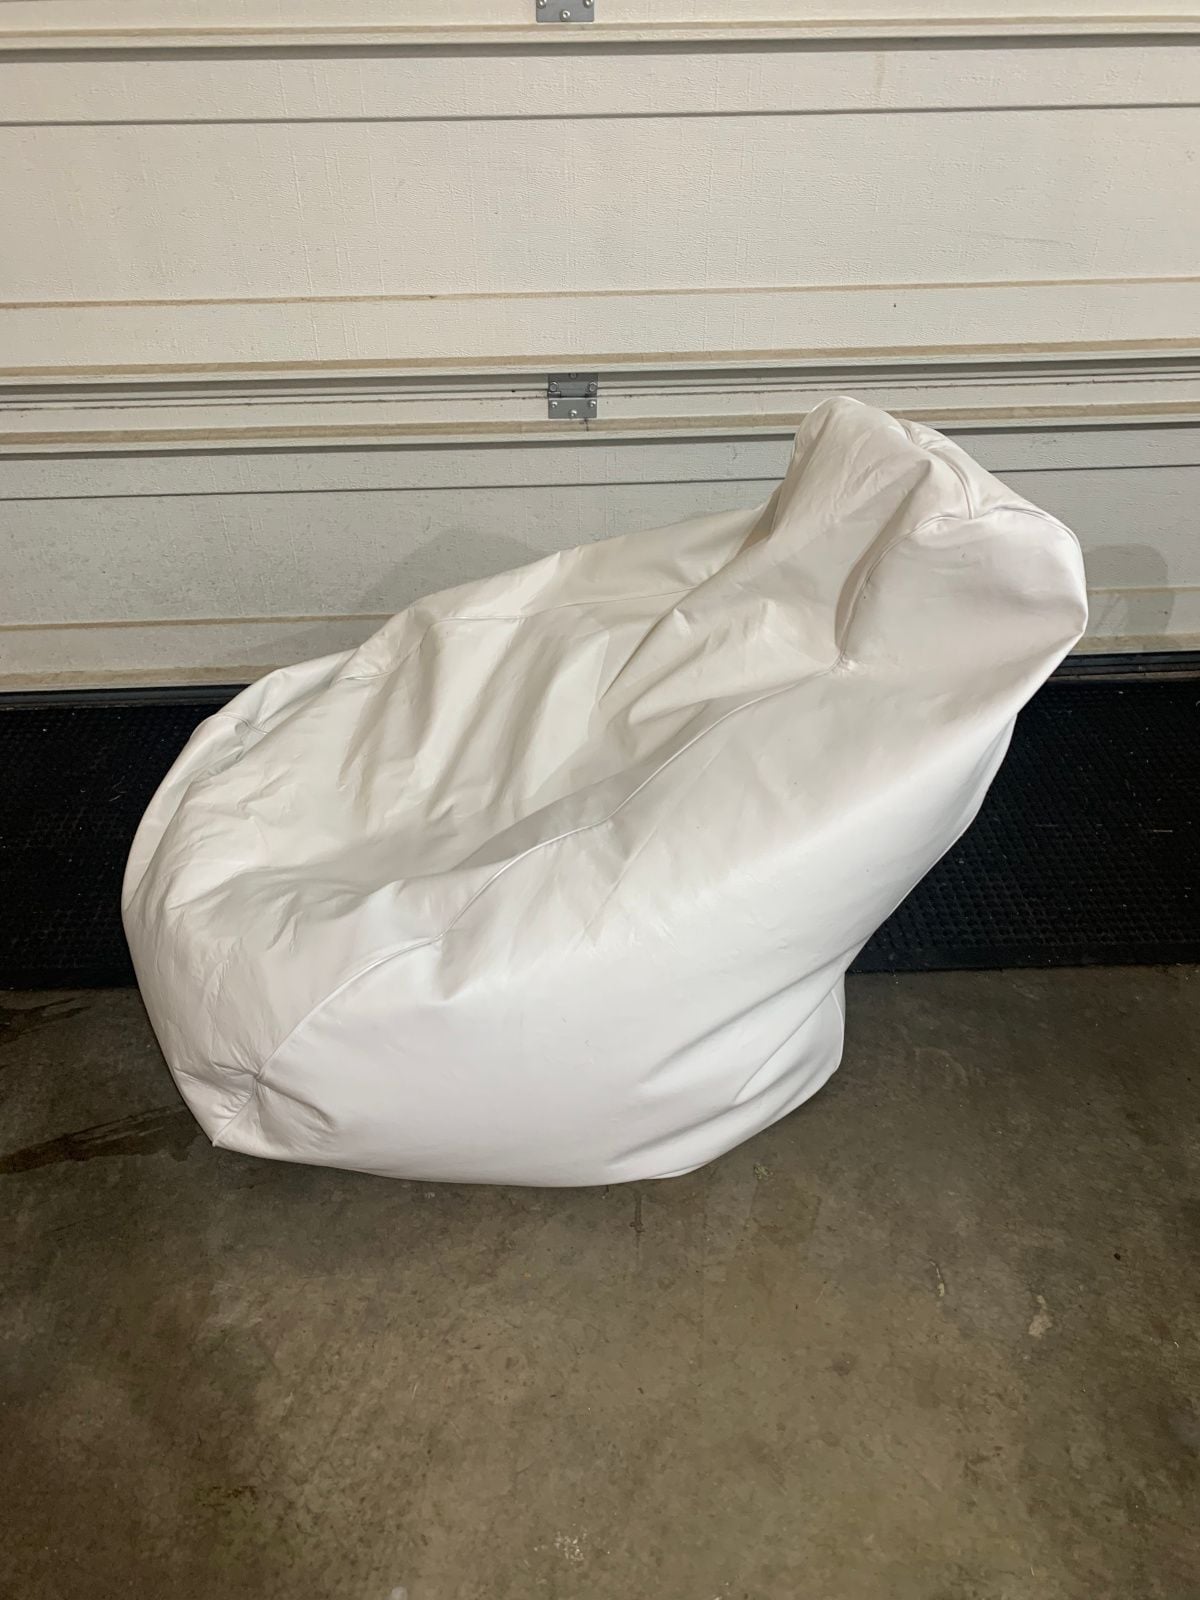 West Marine Bean Bag Chair - The Hull Truth - Boating and Fishing